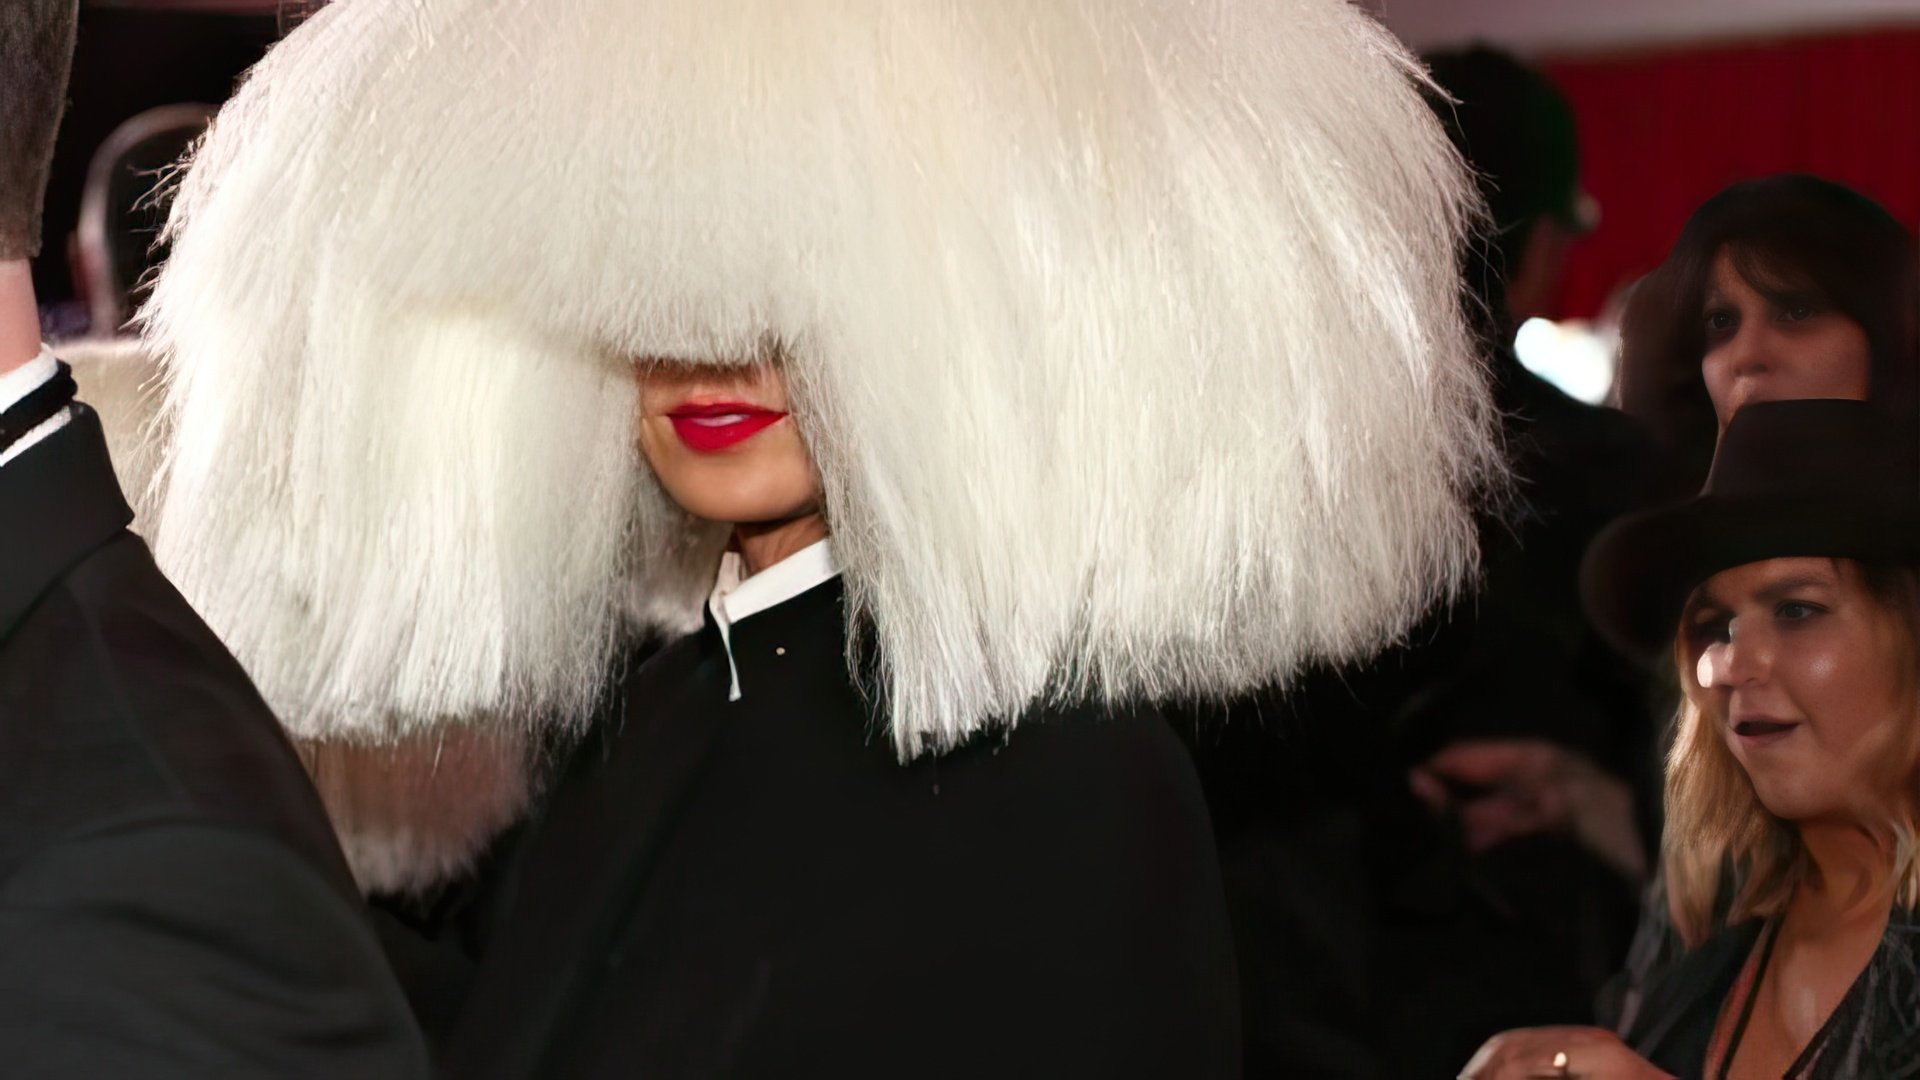 Sia prefers hairstyles that cover her face